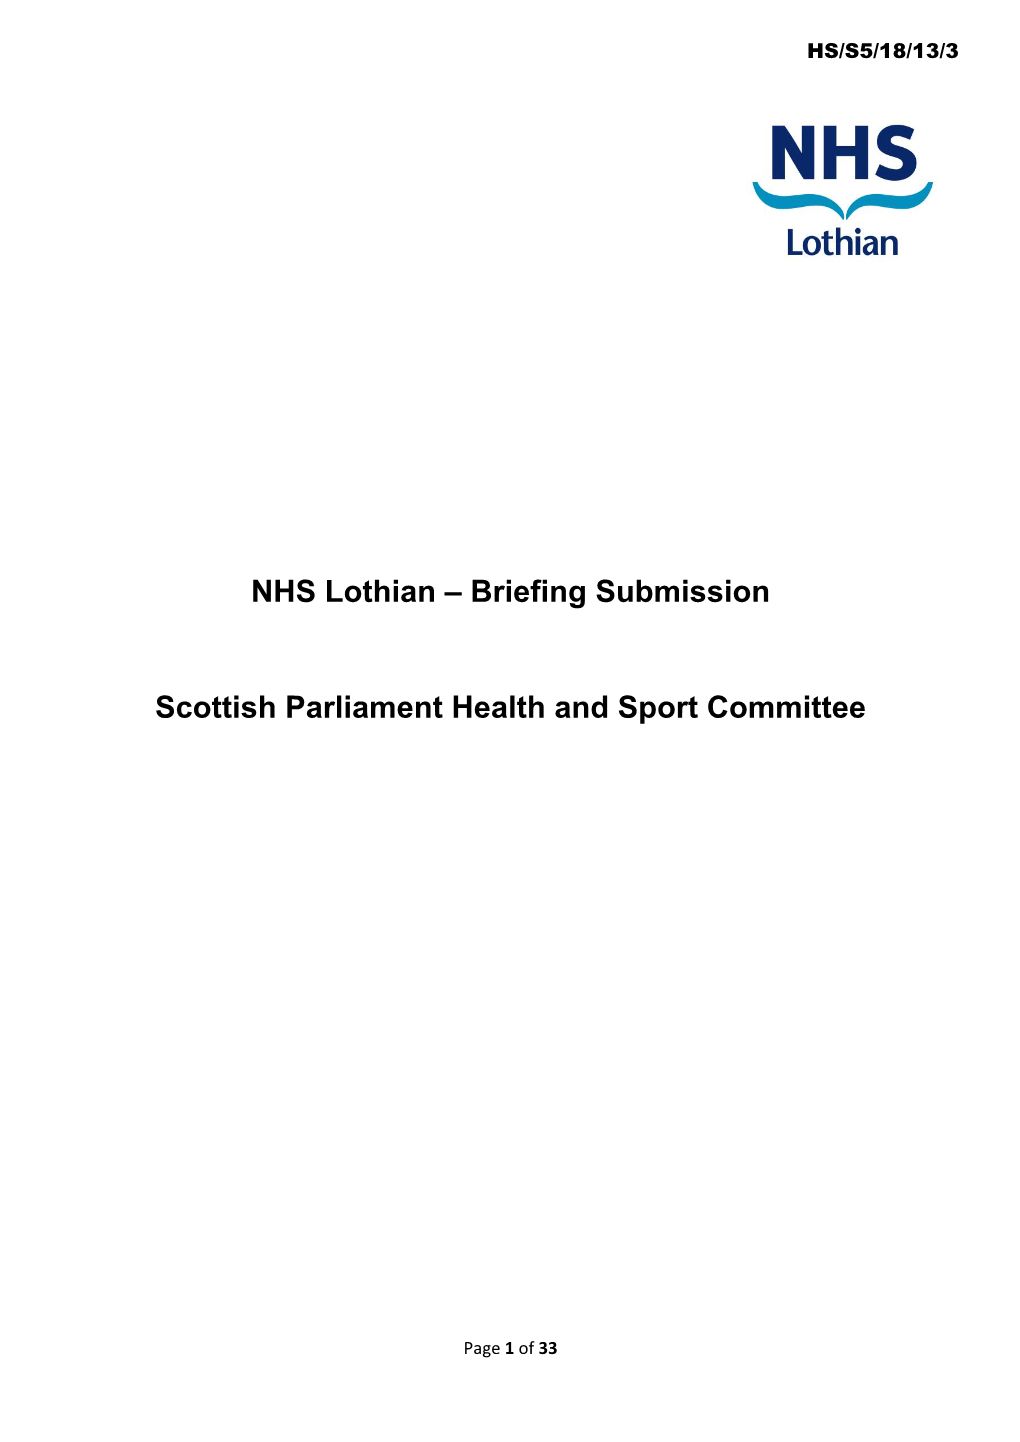 NHS Lothian – Briefing Submission Scottish Parliament Health And